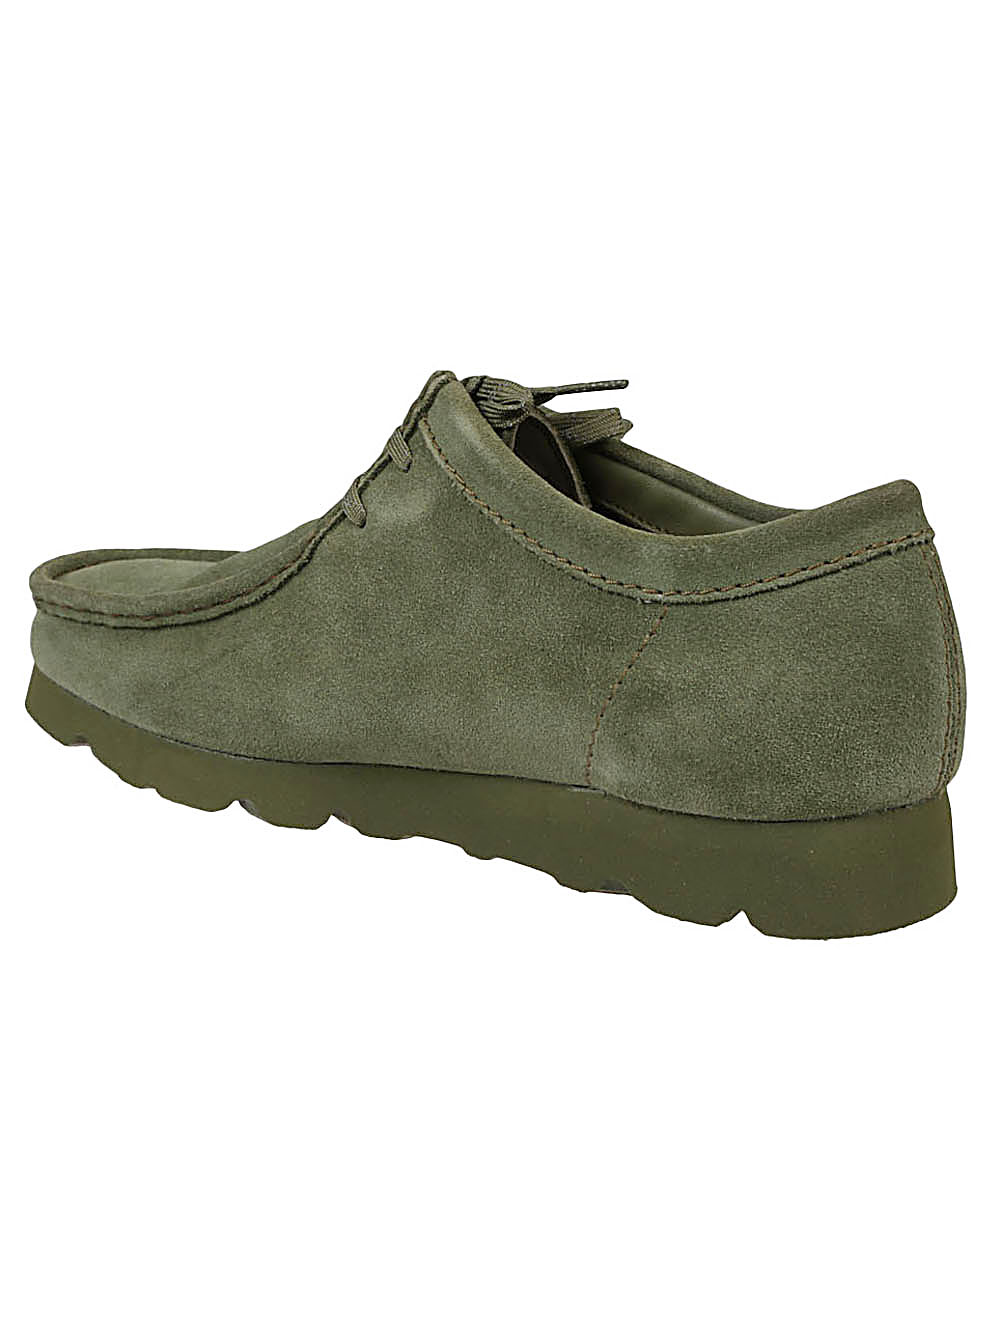 CLARKS CLARKS- Wallabee Gtx Suede Leather Shoes